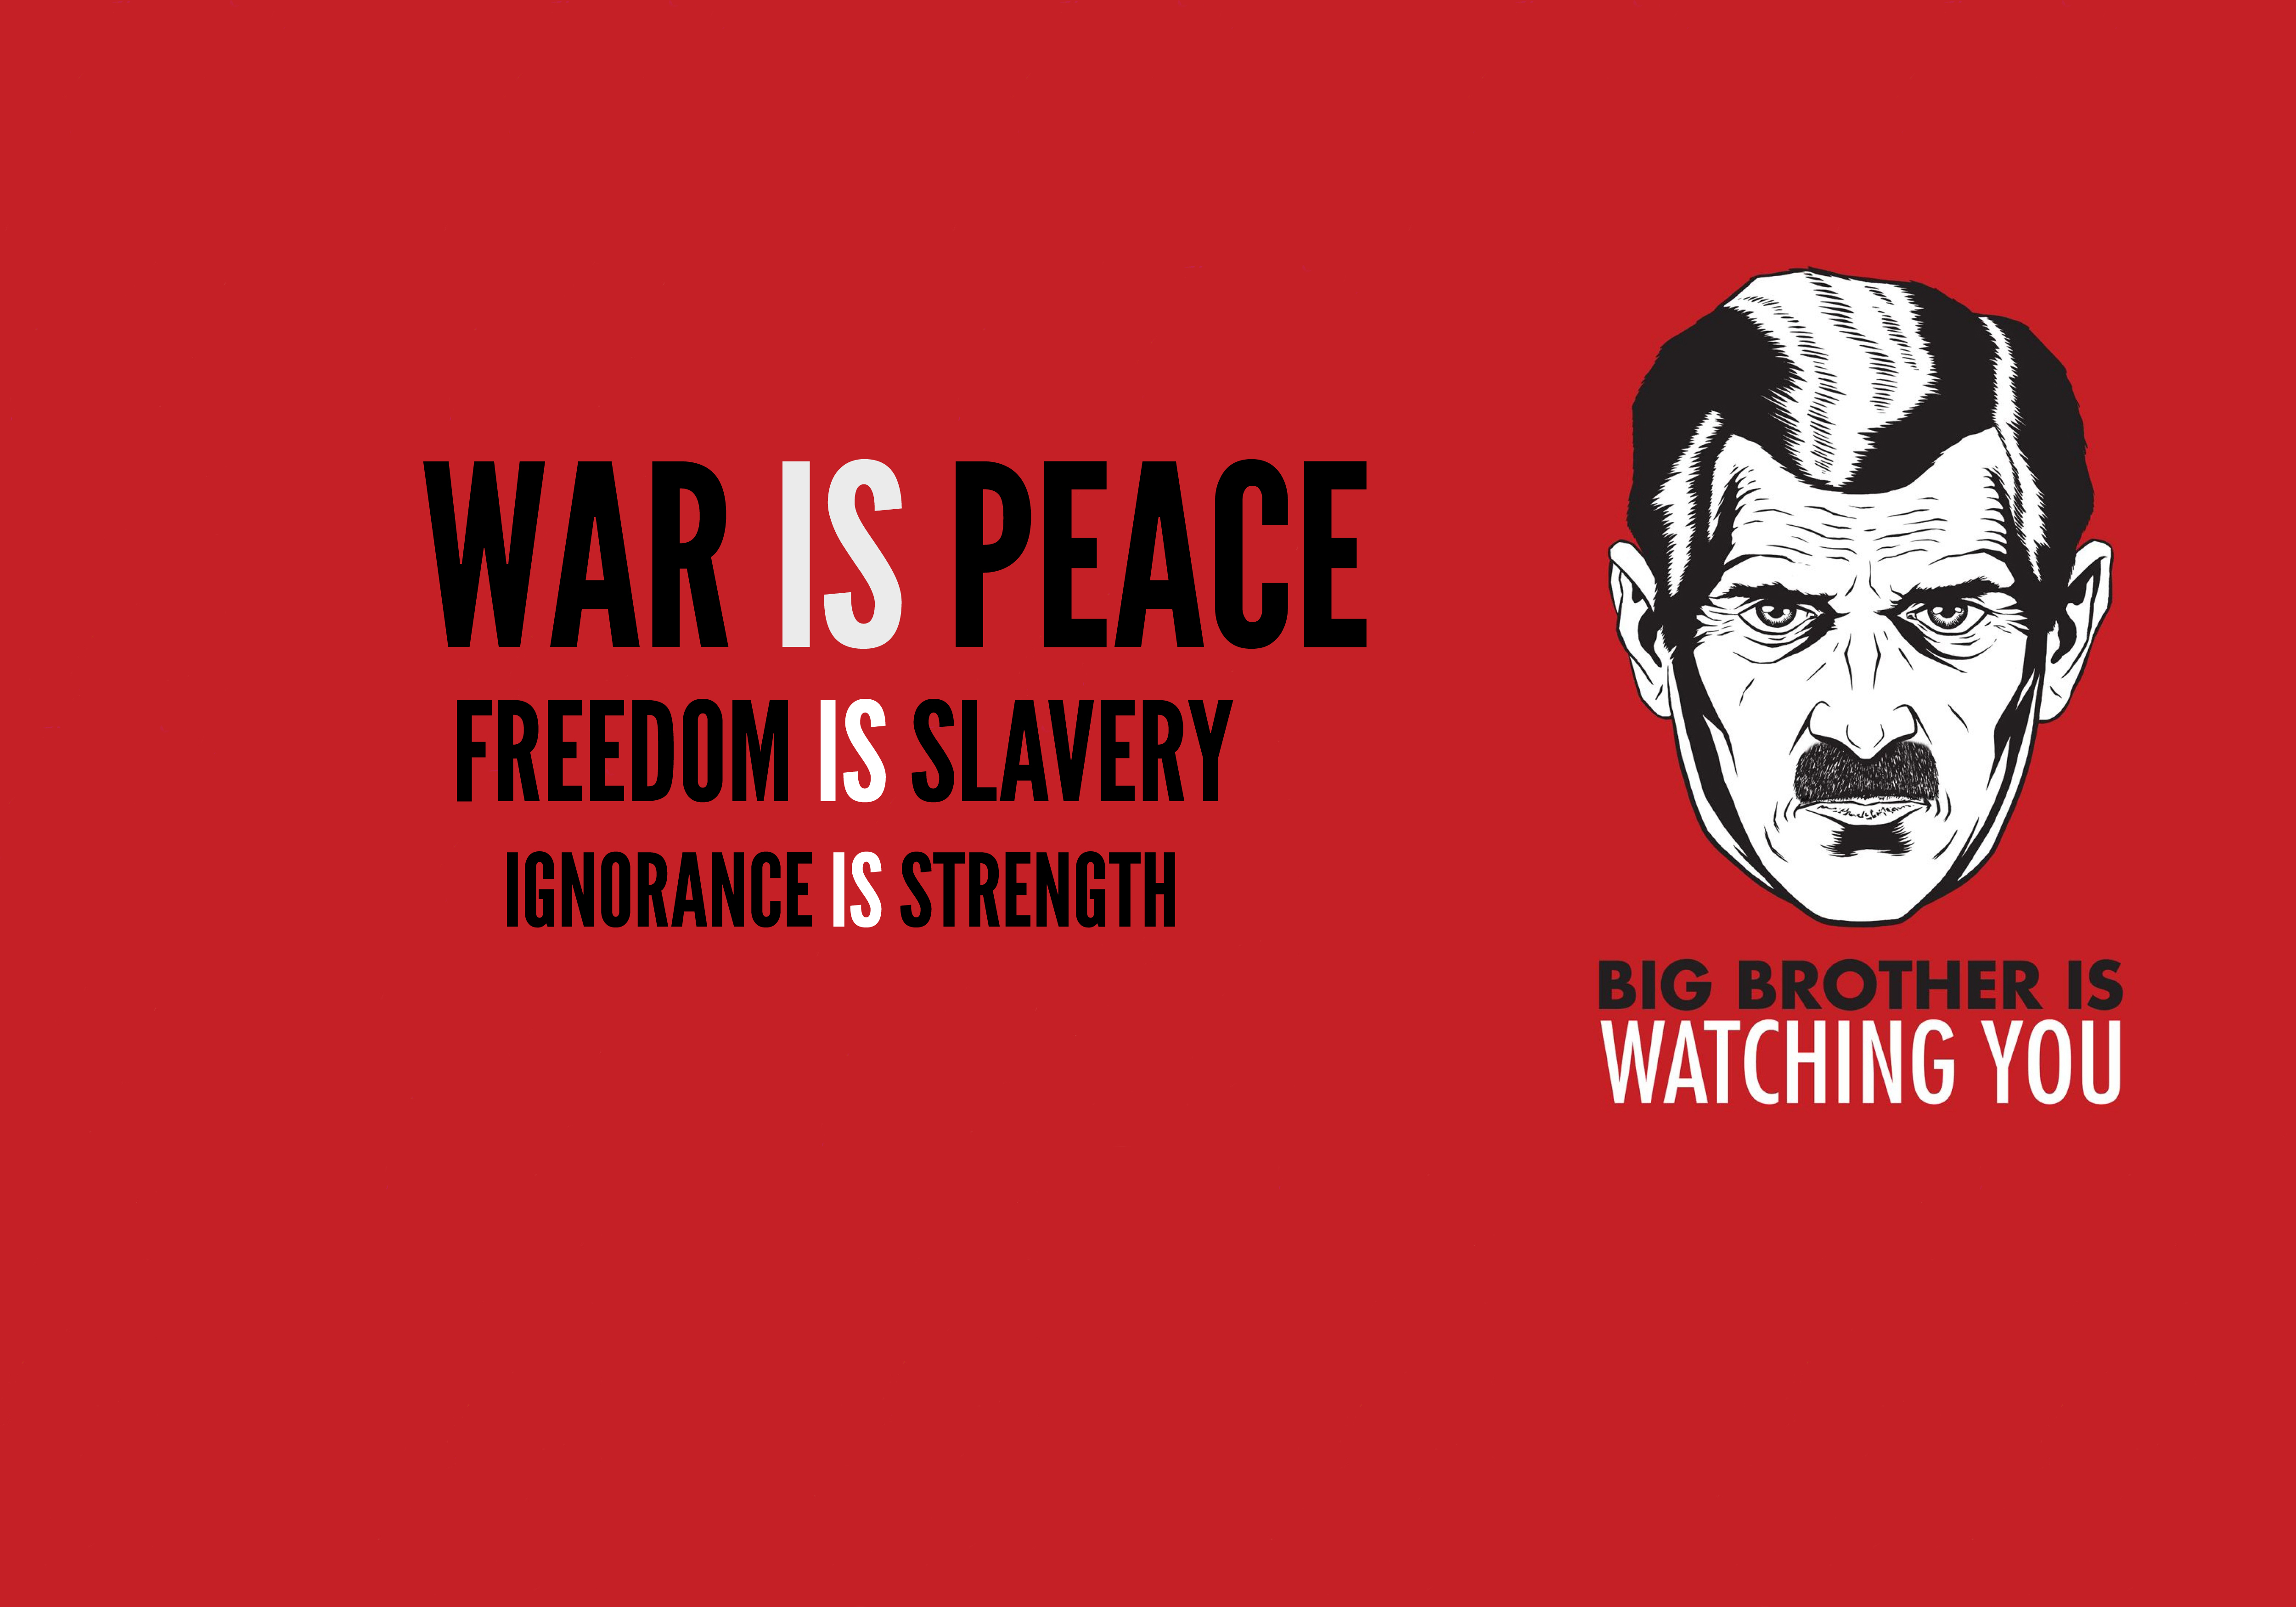 Download wallpaper big brother, big brother, in 1984, orwell, war ...